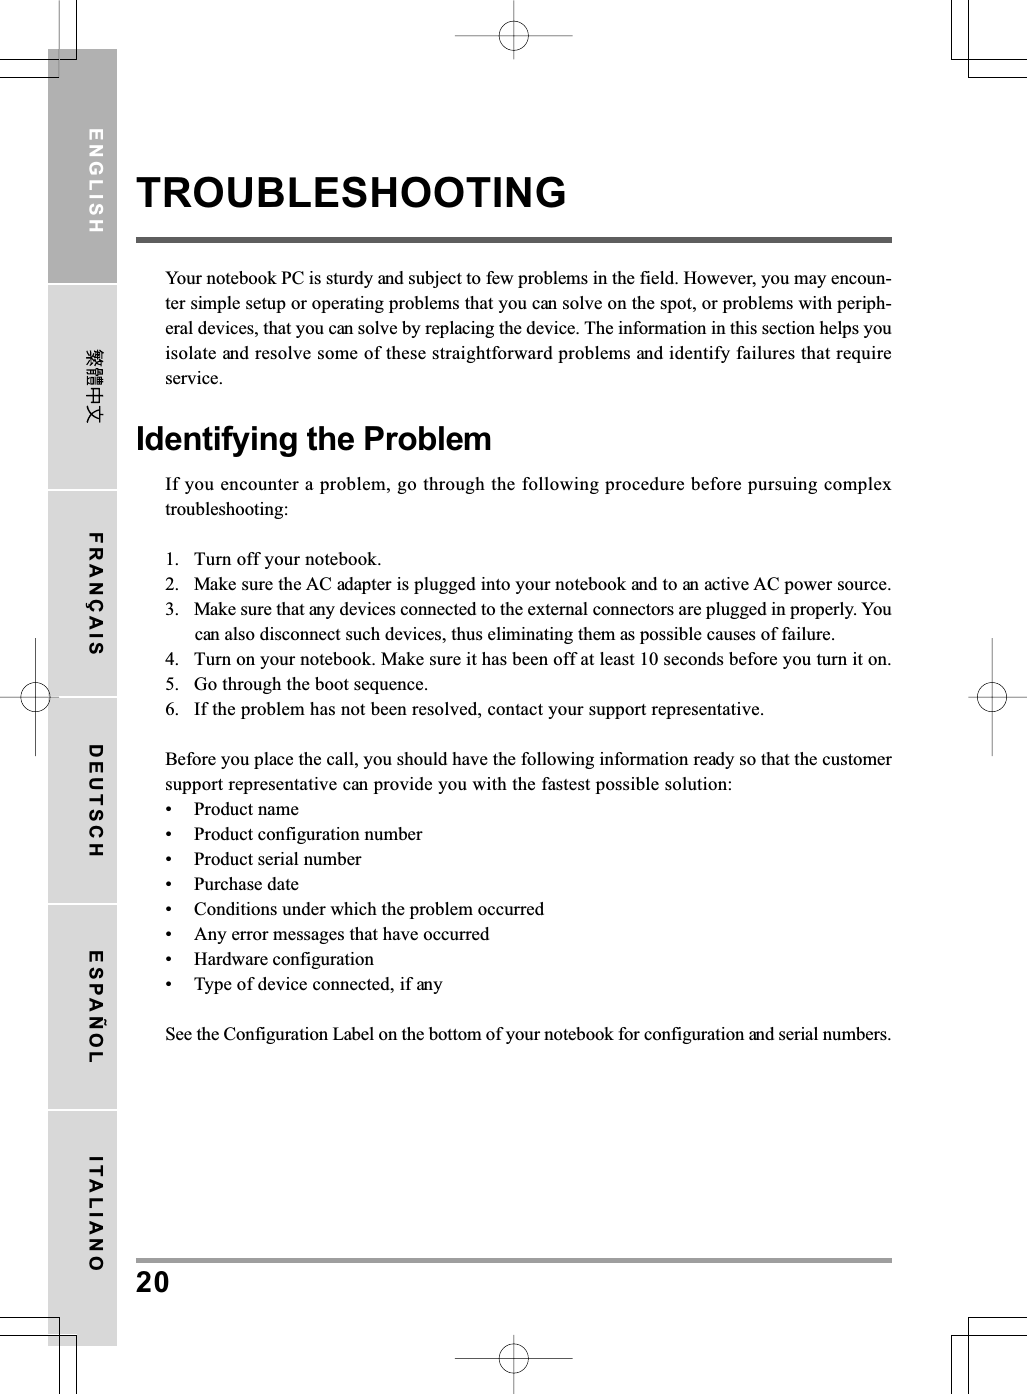 20ENGLISH FRANÇAIS DEUTSCH ESPAÑOL ITALIANOTROUBLESHOOTINGYour notebook PC is sturdy and subject to few problems in the field. However, you may encoun-ter simple setup or operating problems that you can solve on the spot, or problems with periph-eral devices, that you can solve by replacing the device. The information in this section helps youisolate and resolve some of these straightforward problems and identify failures that requireservice.Identifying the ProblemIf you encounter a problem, go through the following procedure before pursuing complextroubleshooting:1. Turn off your notebook.2. Make sure the AC adapter is plugged into your notebook and to an active AC power source.3. Make sure that any devices connected to the external connectors are plugged in properly. Youcan also disconnect such devices, thus eliminating them as possible causes of failure.4. Turn on your notebook. Make sure it has been off at least 10 seconds before you turn it on.5. Go through the boot sequence.6. If the problem has not been resolved, contact your support representative.Before you place the call, you should have the following information ready so that the customersupport representative can provide you with the fastest possible solution:• Product name• Product configuration number• Product serial number• Purchase date• Conditions under which the problem occurred• Any error messages that have occurred• Hardware configuration• Type of device connected, if anySee the Configuration Label on the bottom of your notebook for configuration and serial numbers.